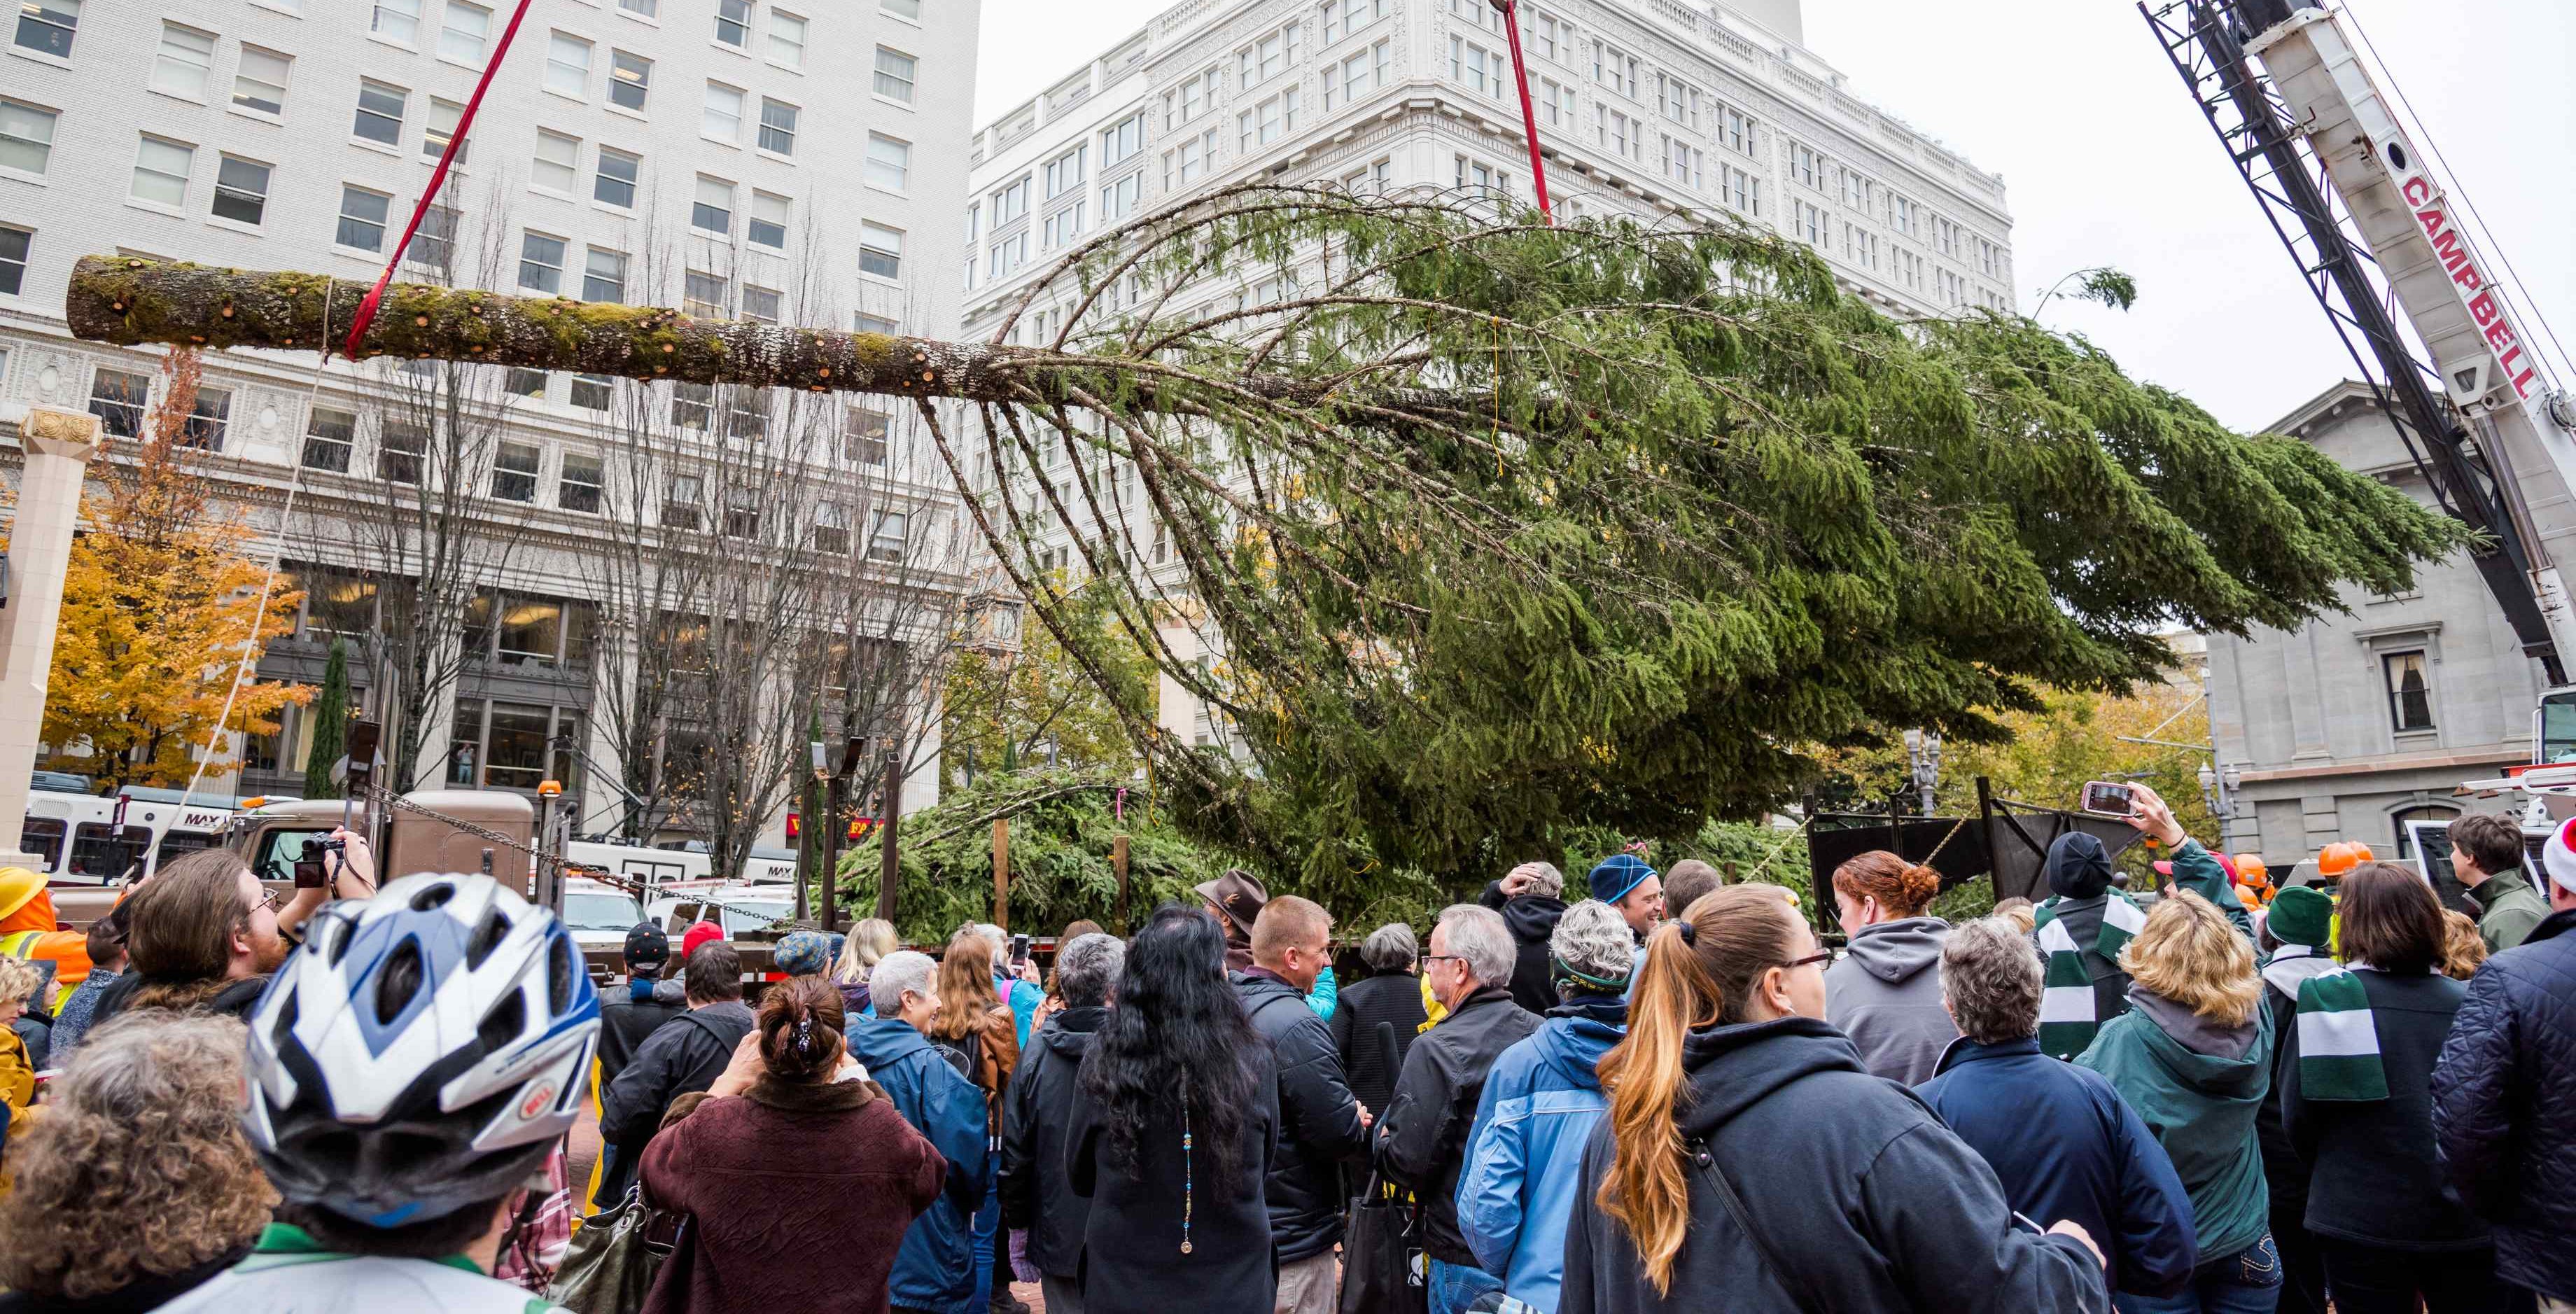 The City of Portland’s Tree is Arriving At Noon on Friday, November 15th!